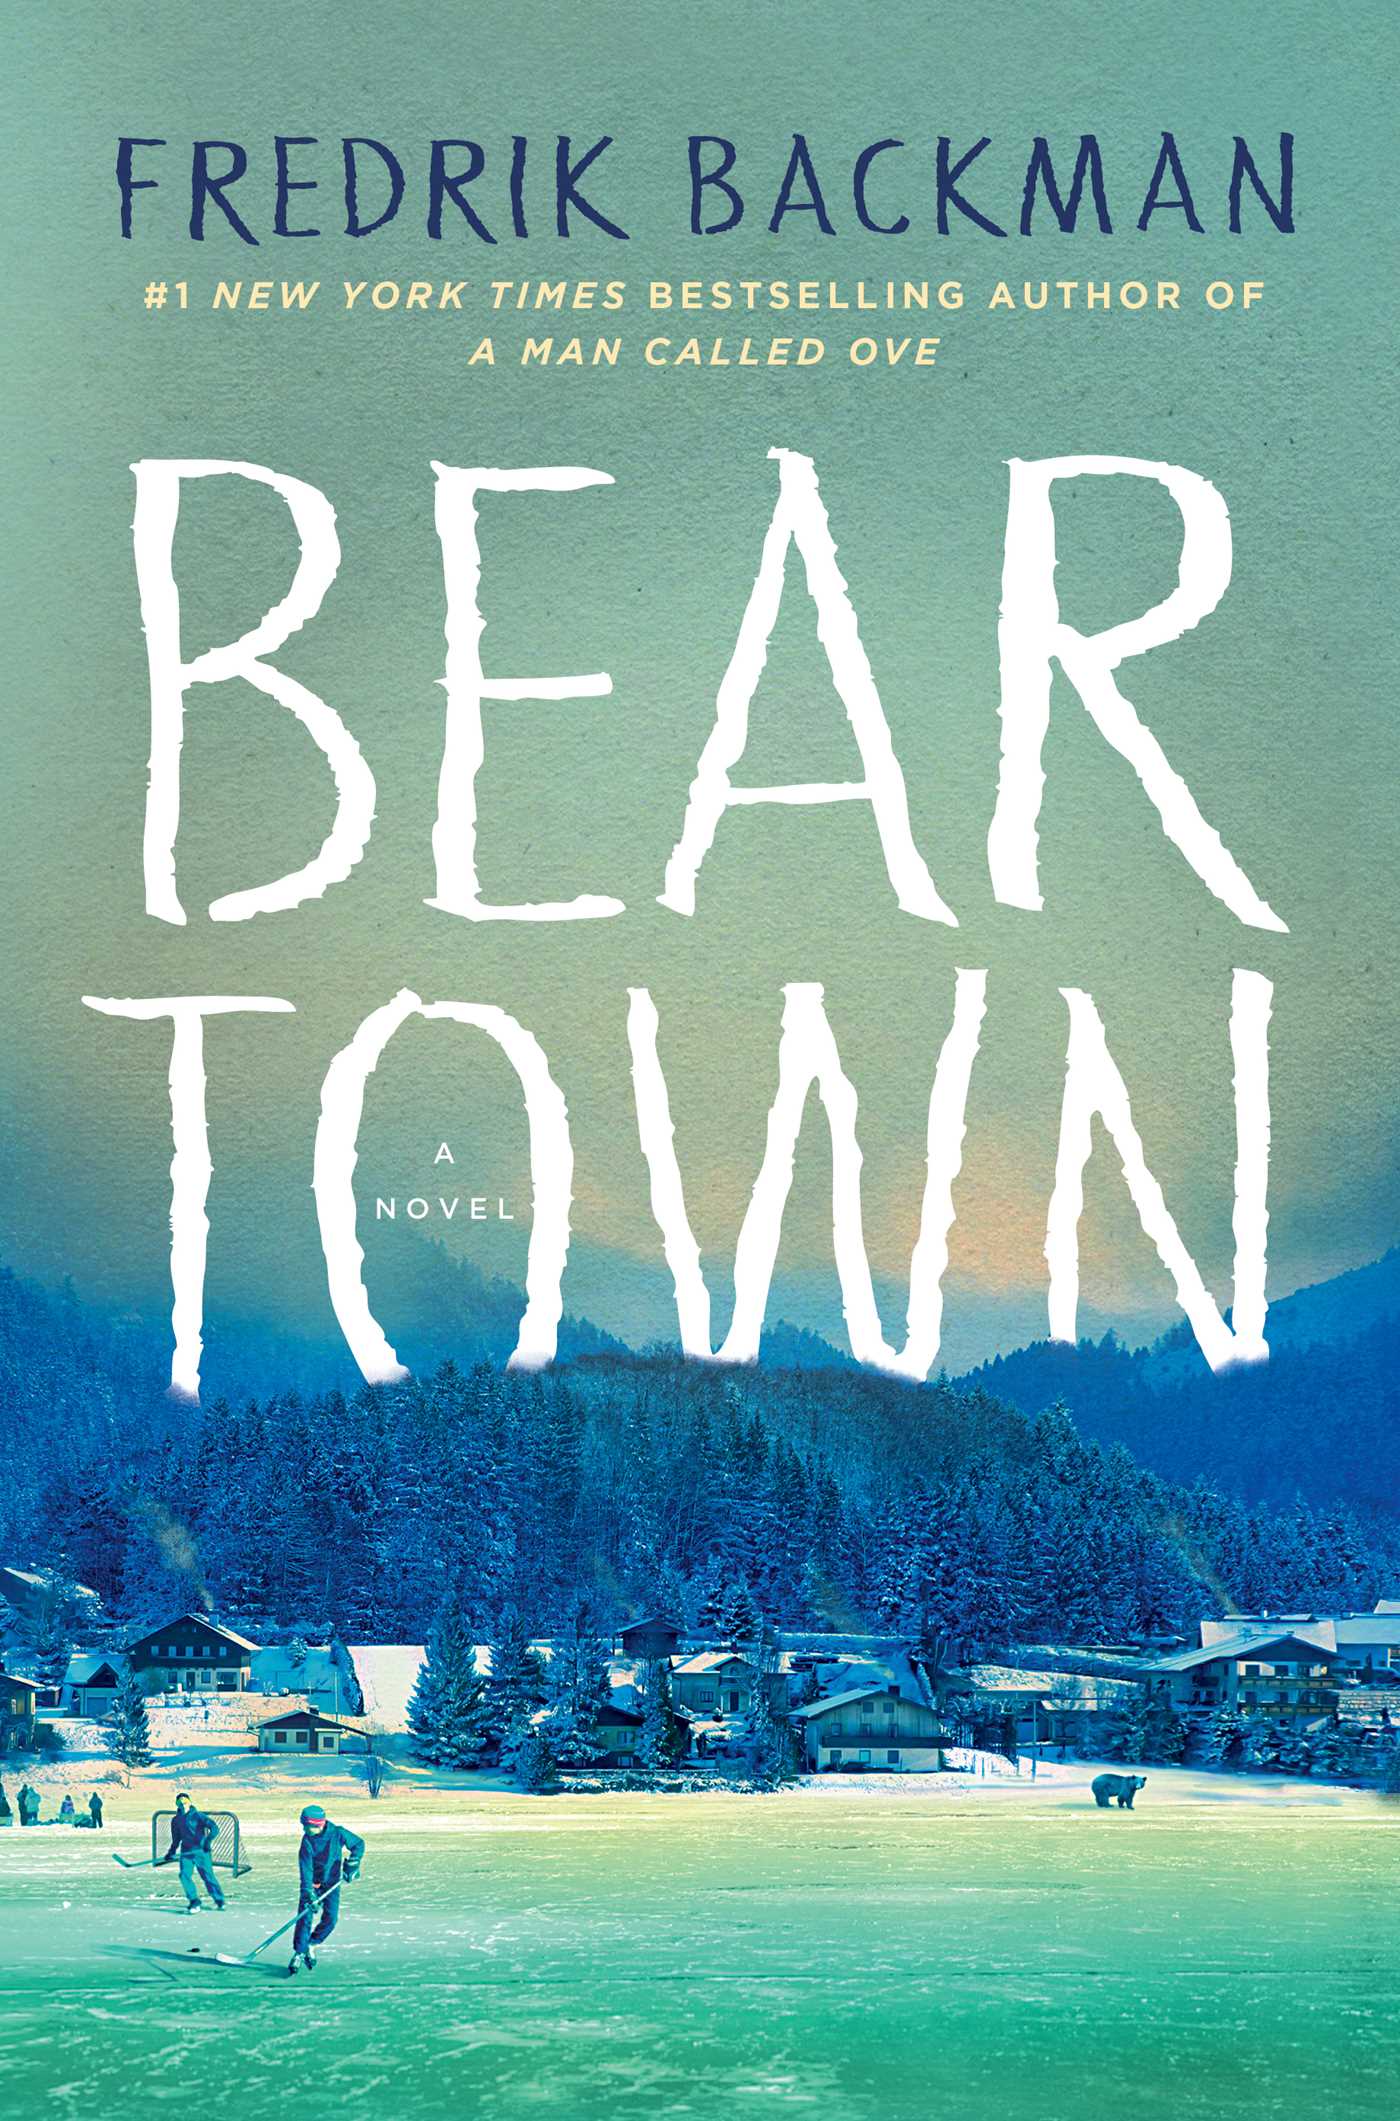 Book cover for Beartown by Fredrik Backman.